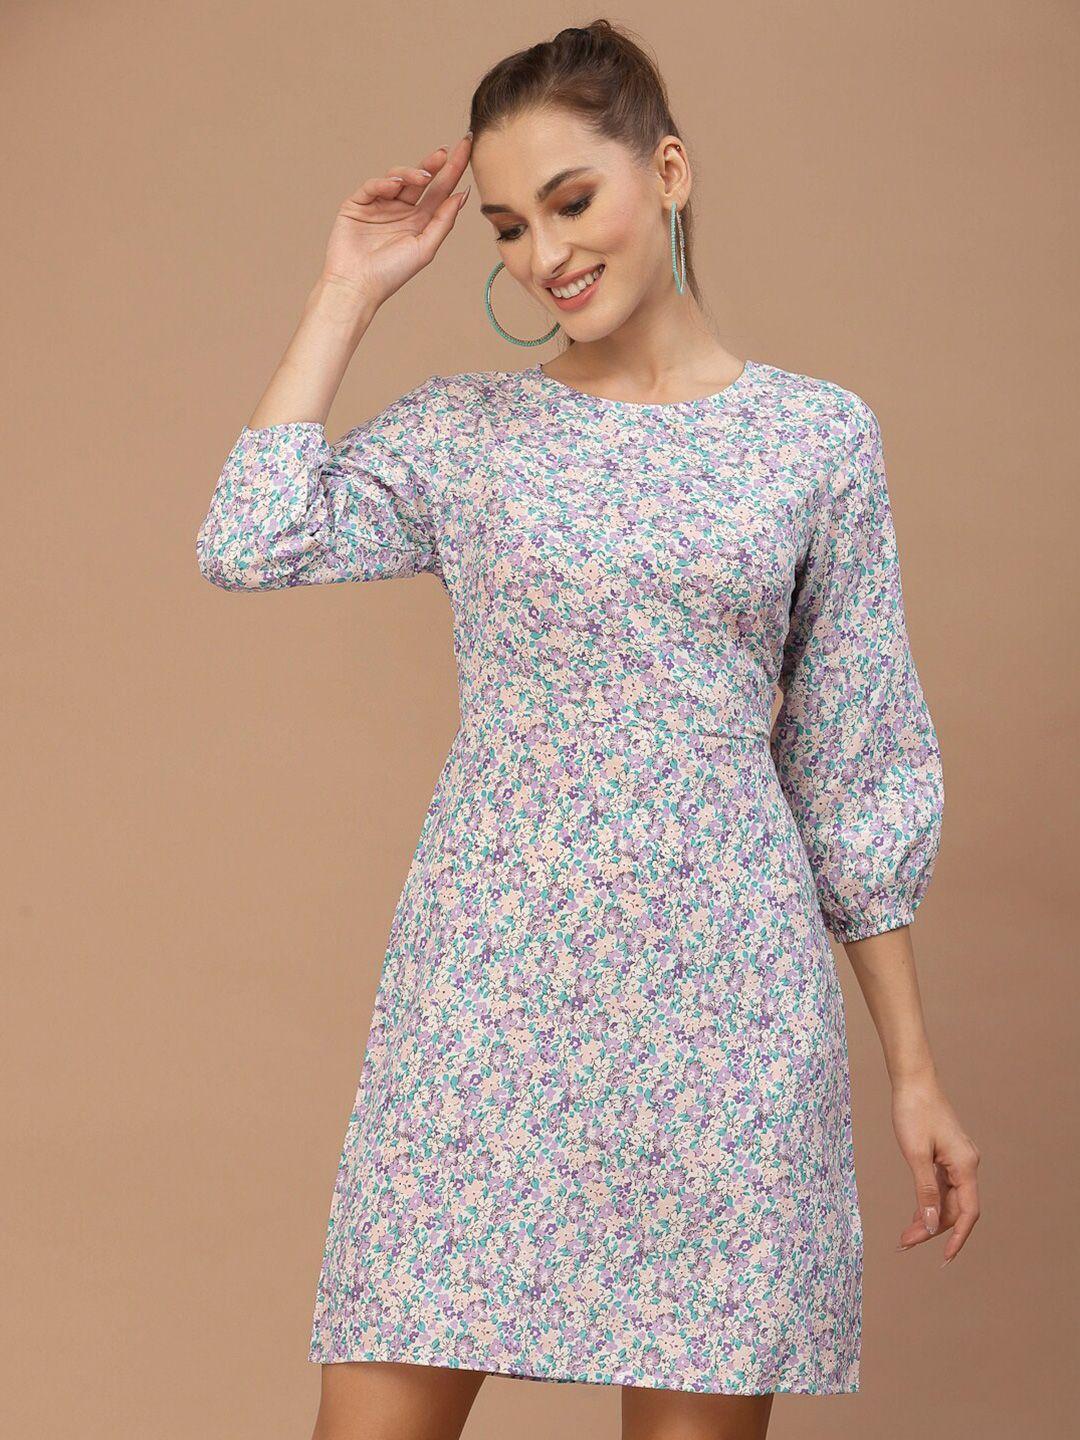 kassually women lavender & green floral printed a-line dress